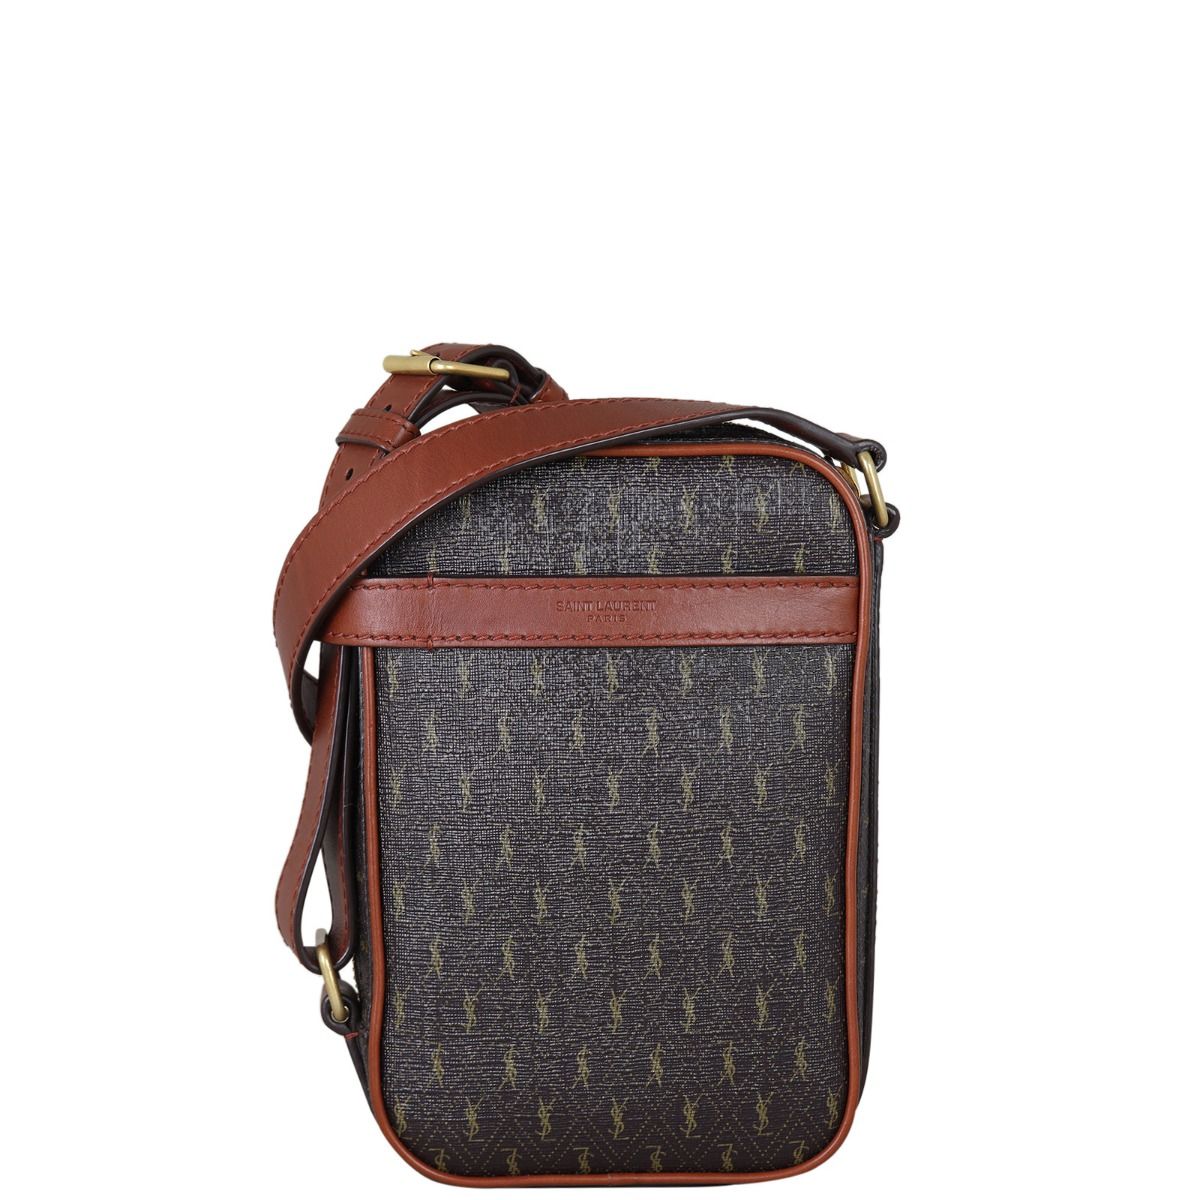 YSL LE MONOGRAMME CROSSBODY BAG IN MONOGRAM CANVAS AND SMOOTH LEATHER